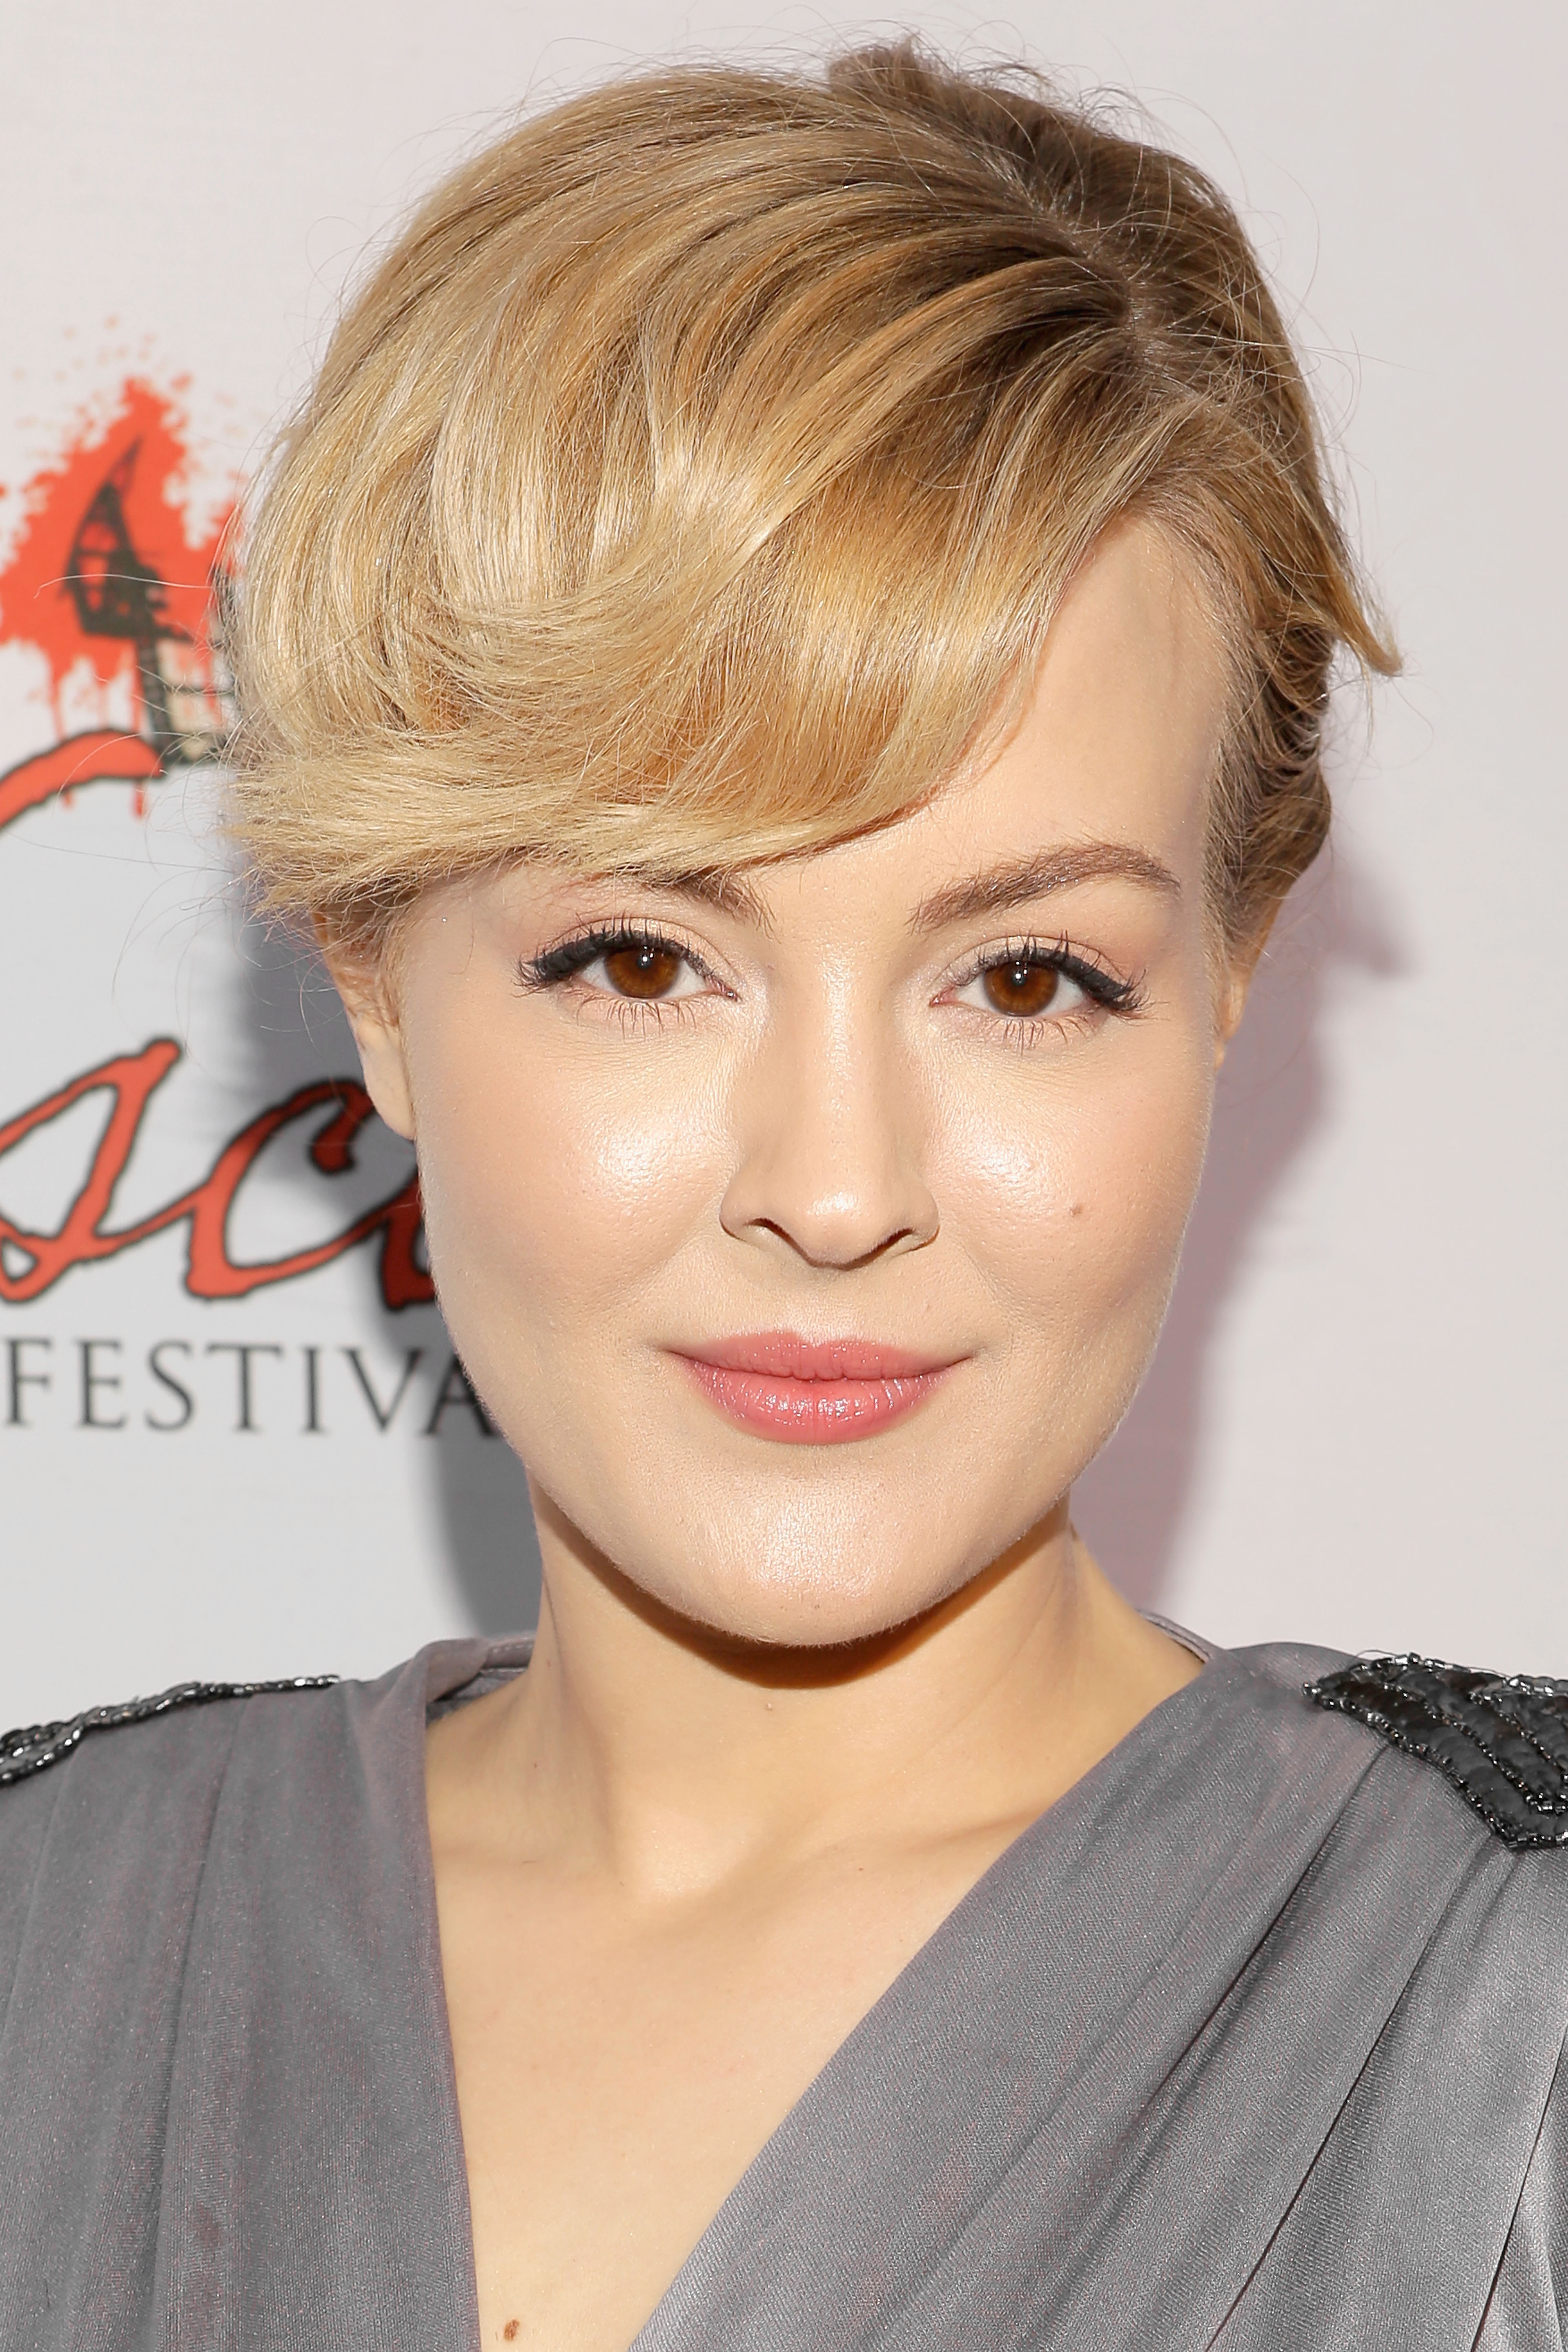 Azure Parsons arrives at the 2013 Film Festival Red Carpet Event at American Cinematheque's Egyptian Theatre on July 13, 2013 in Hollywood, California